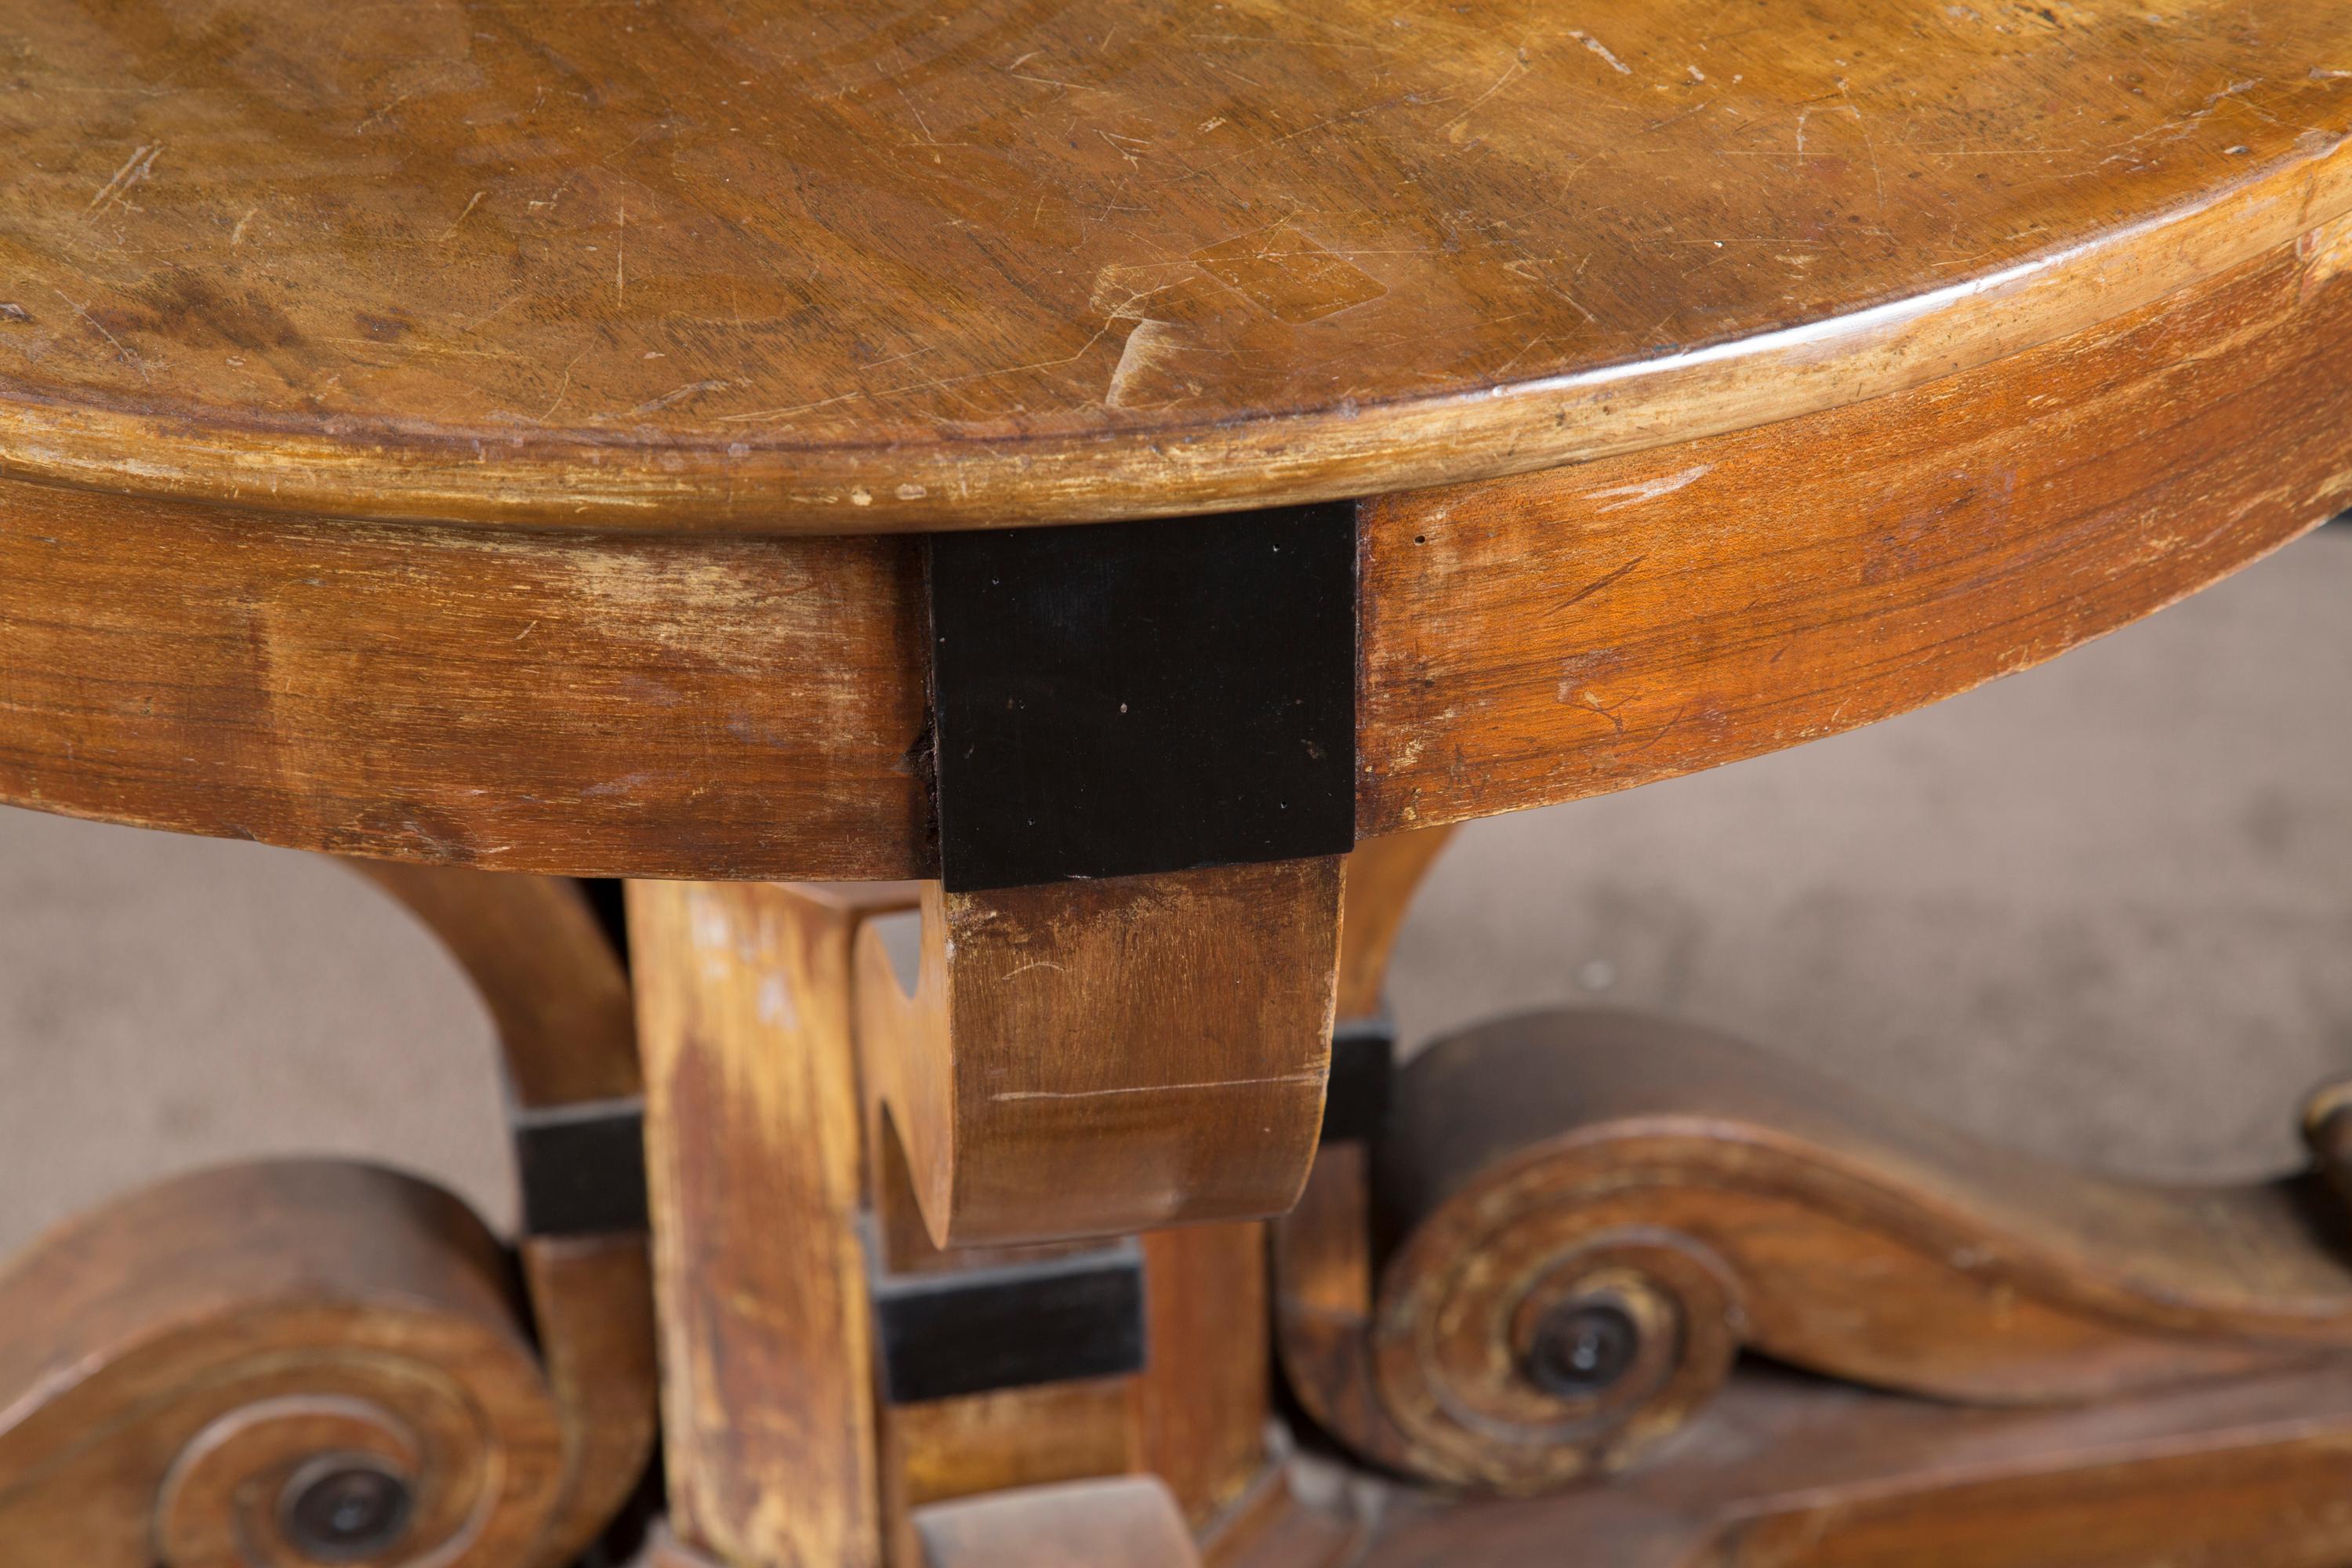 Fantastic period round Biedermeier pedestal table made of ebony and walnut. The German antique piece dates back to the early 19th century, circa 1820, and perfectly exemplifies the style and emotion of the era in which it was created.

This piece is